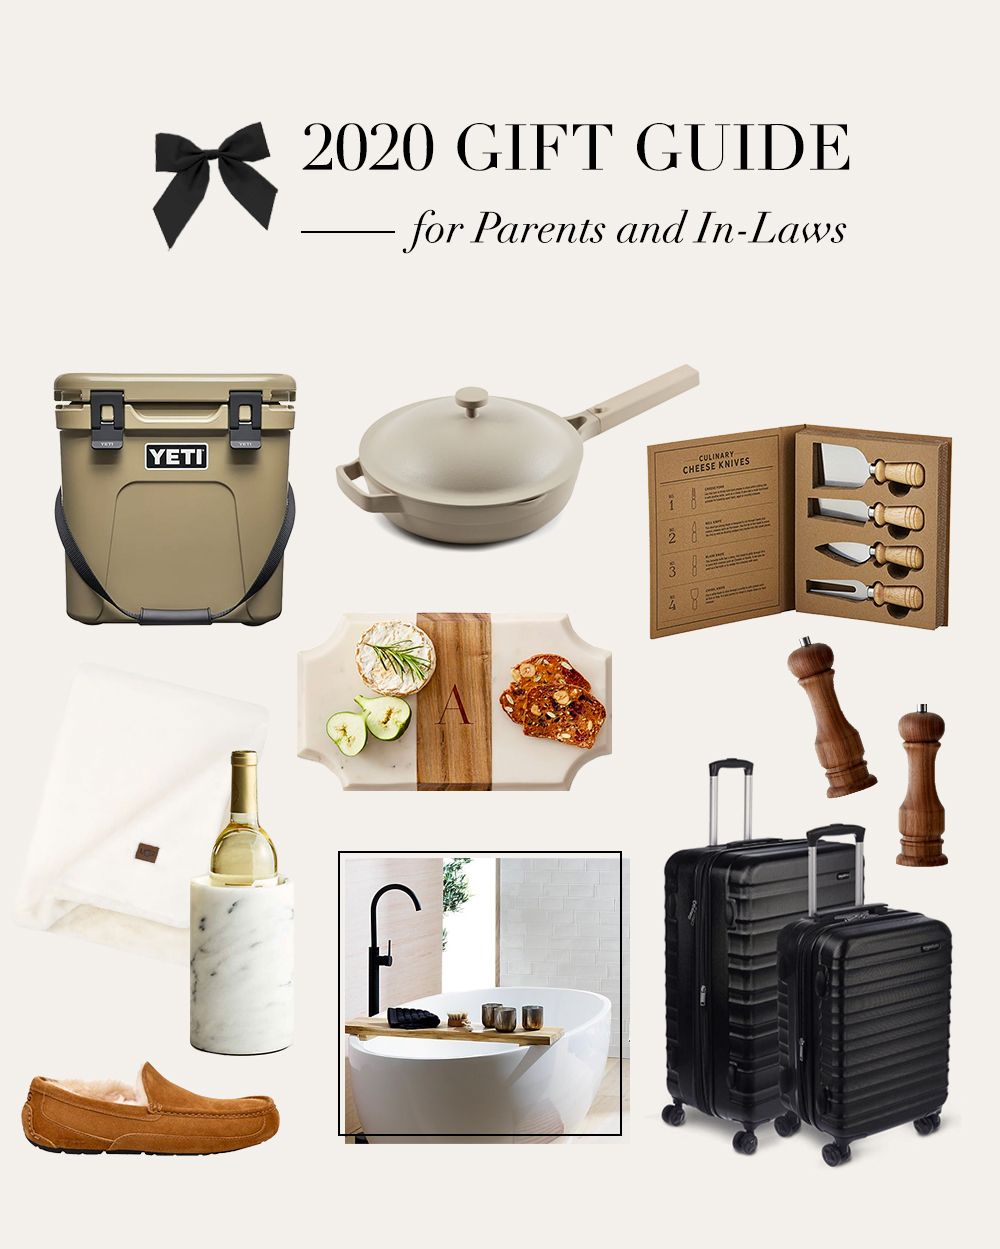 2020 Gift Guide: Parents & In-Laws